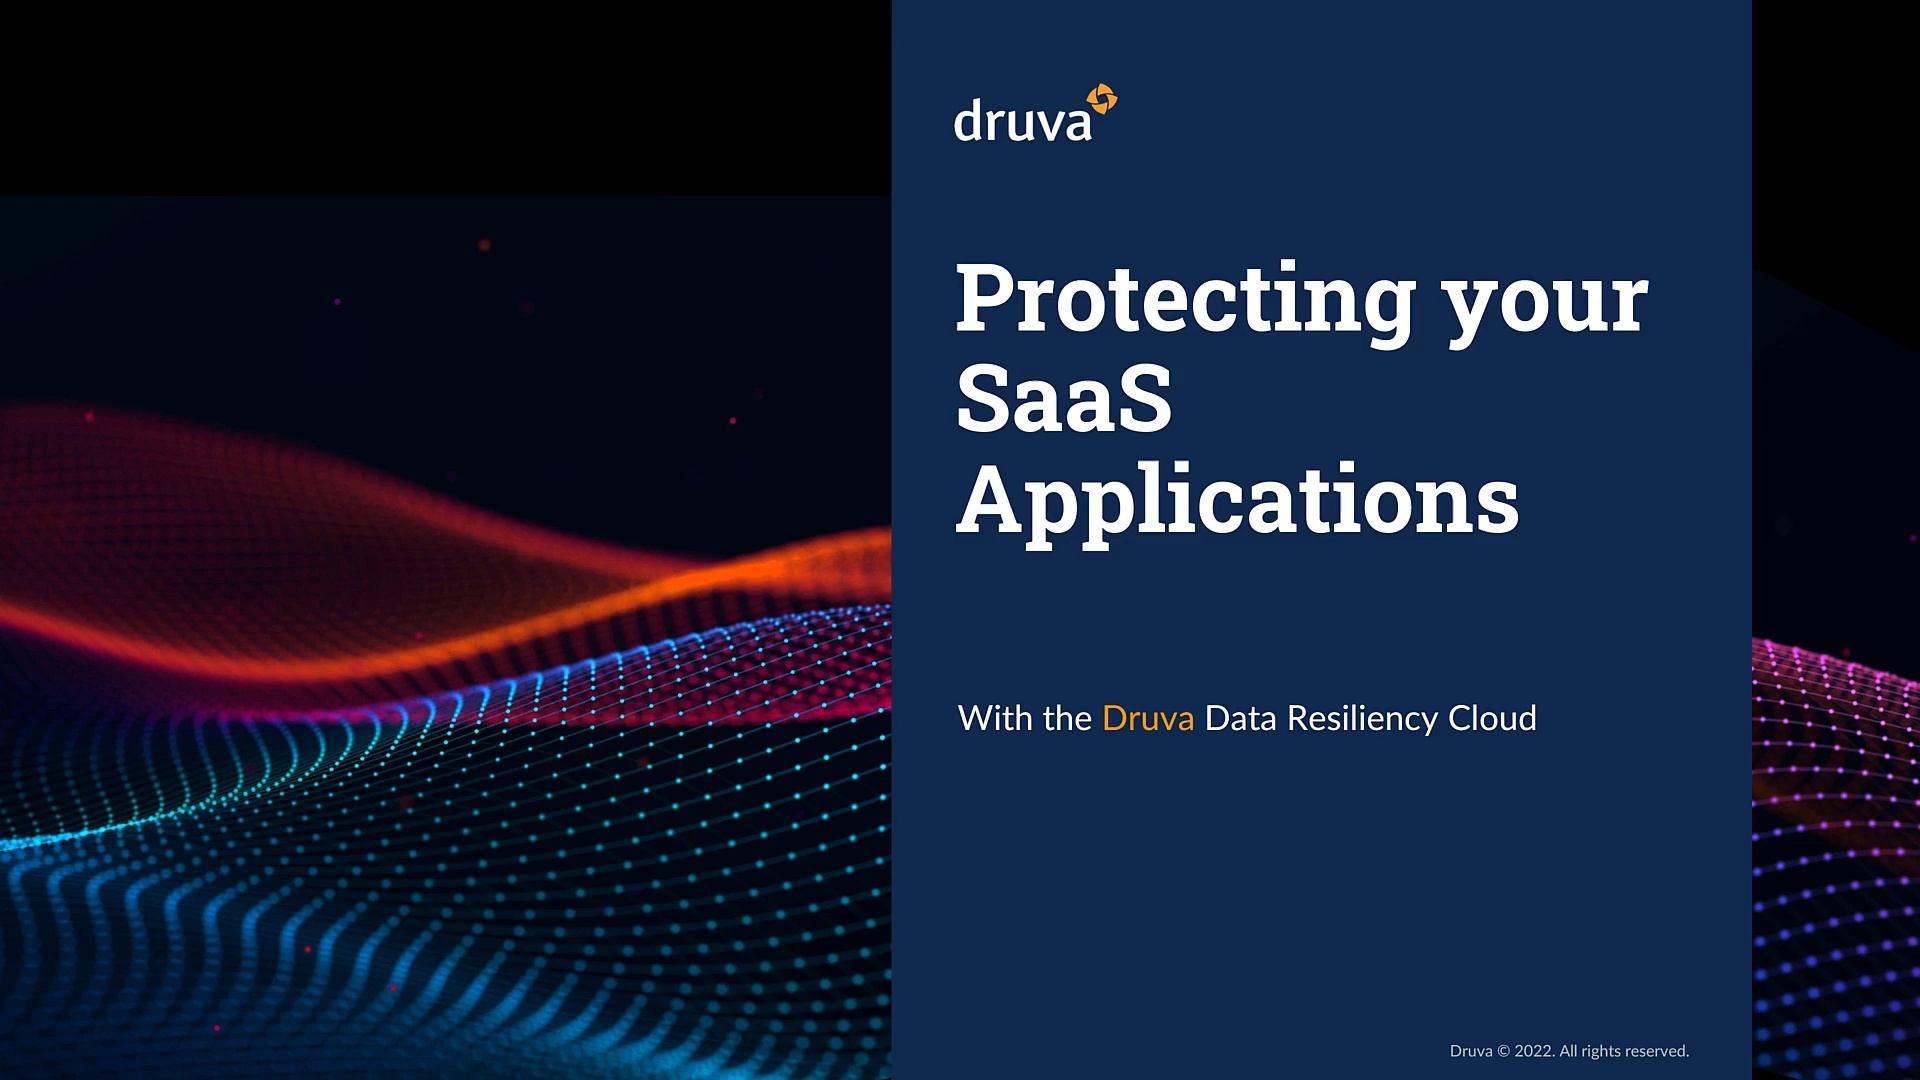 Protecting your SaaS Applications with the Druva Data Resiliency Cloud